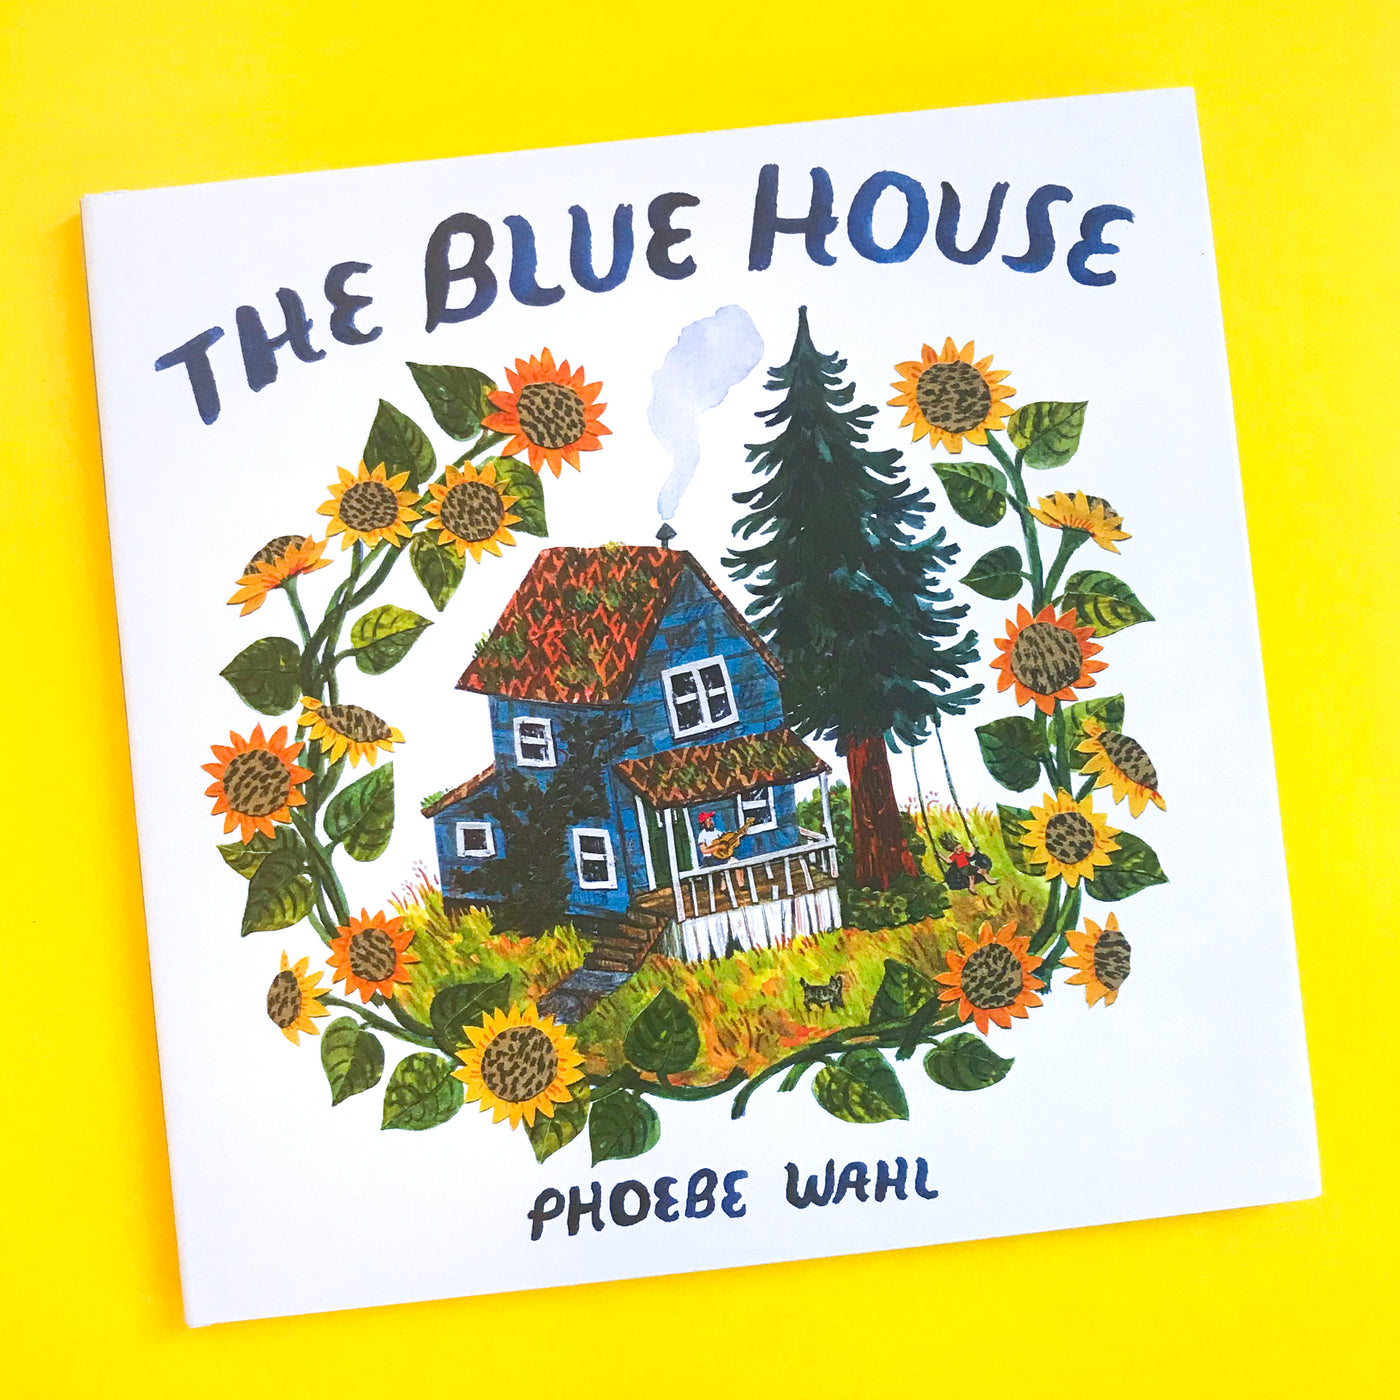 The Blue House by Phoebe Wahl